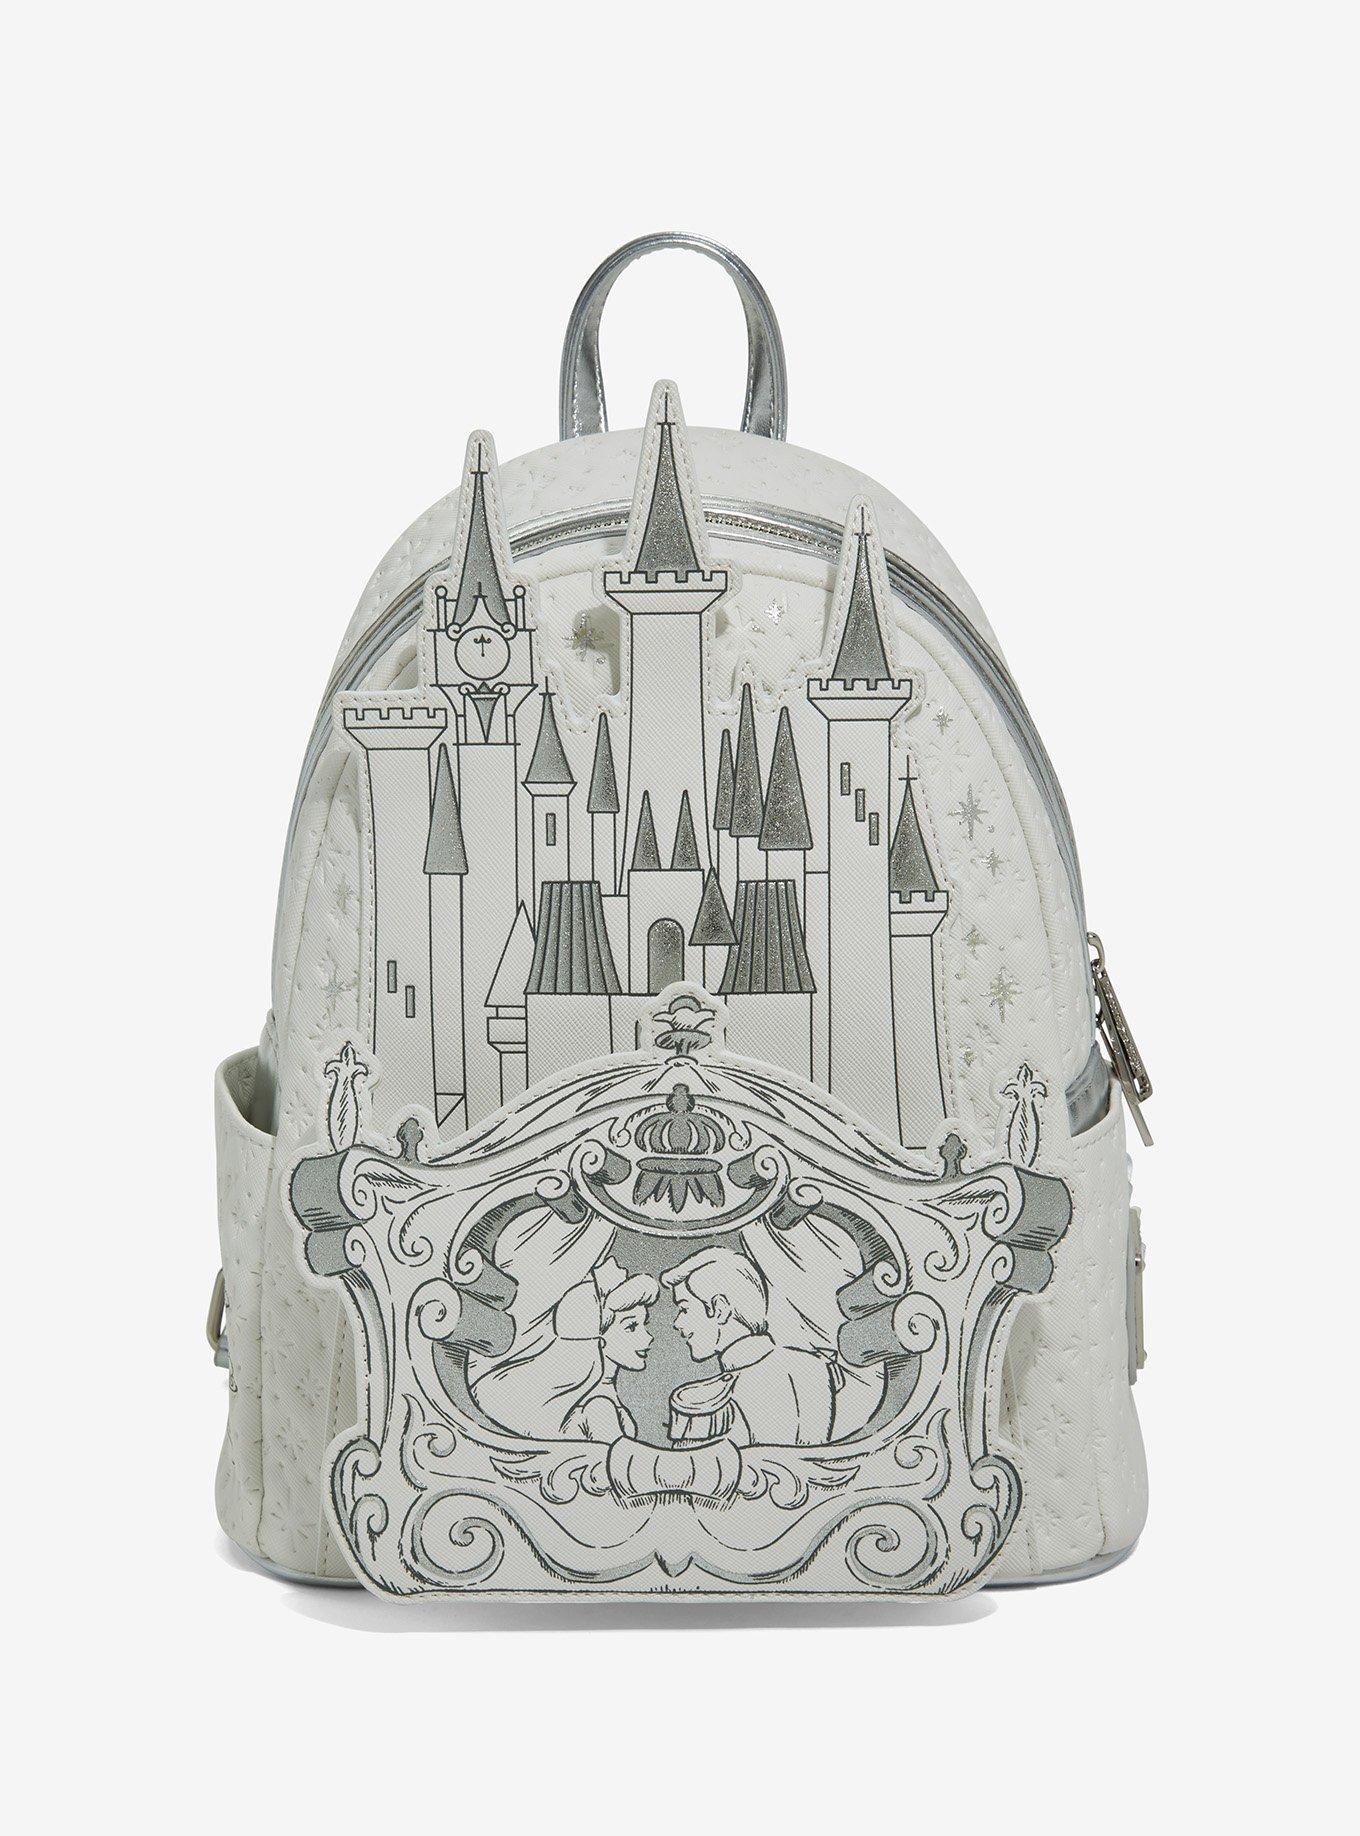 Loungefly Snow White Film Scenes Mini-Backpack 